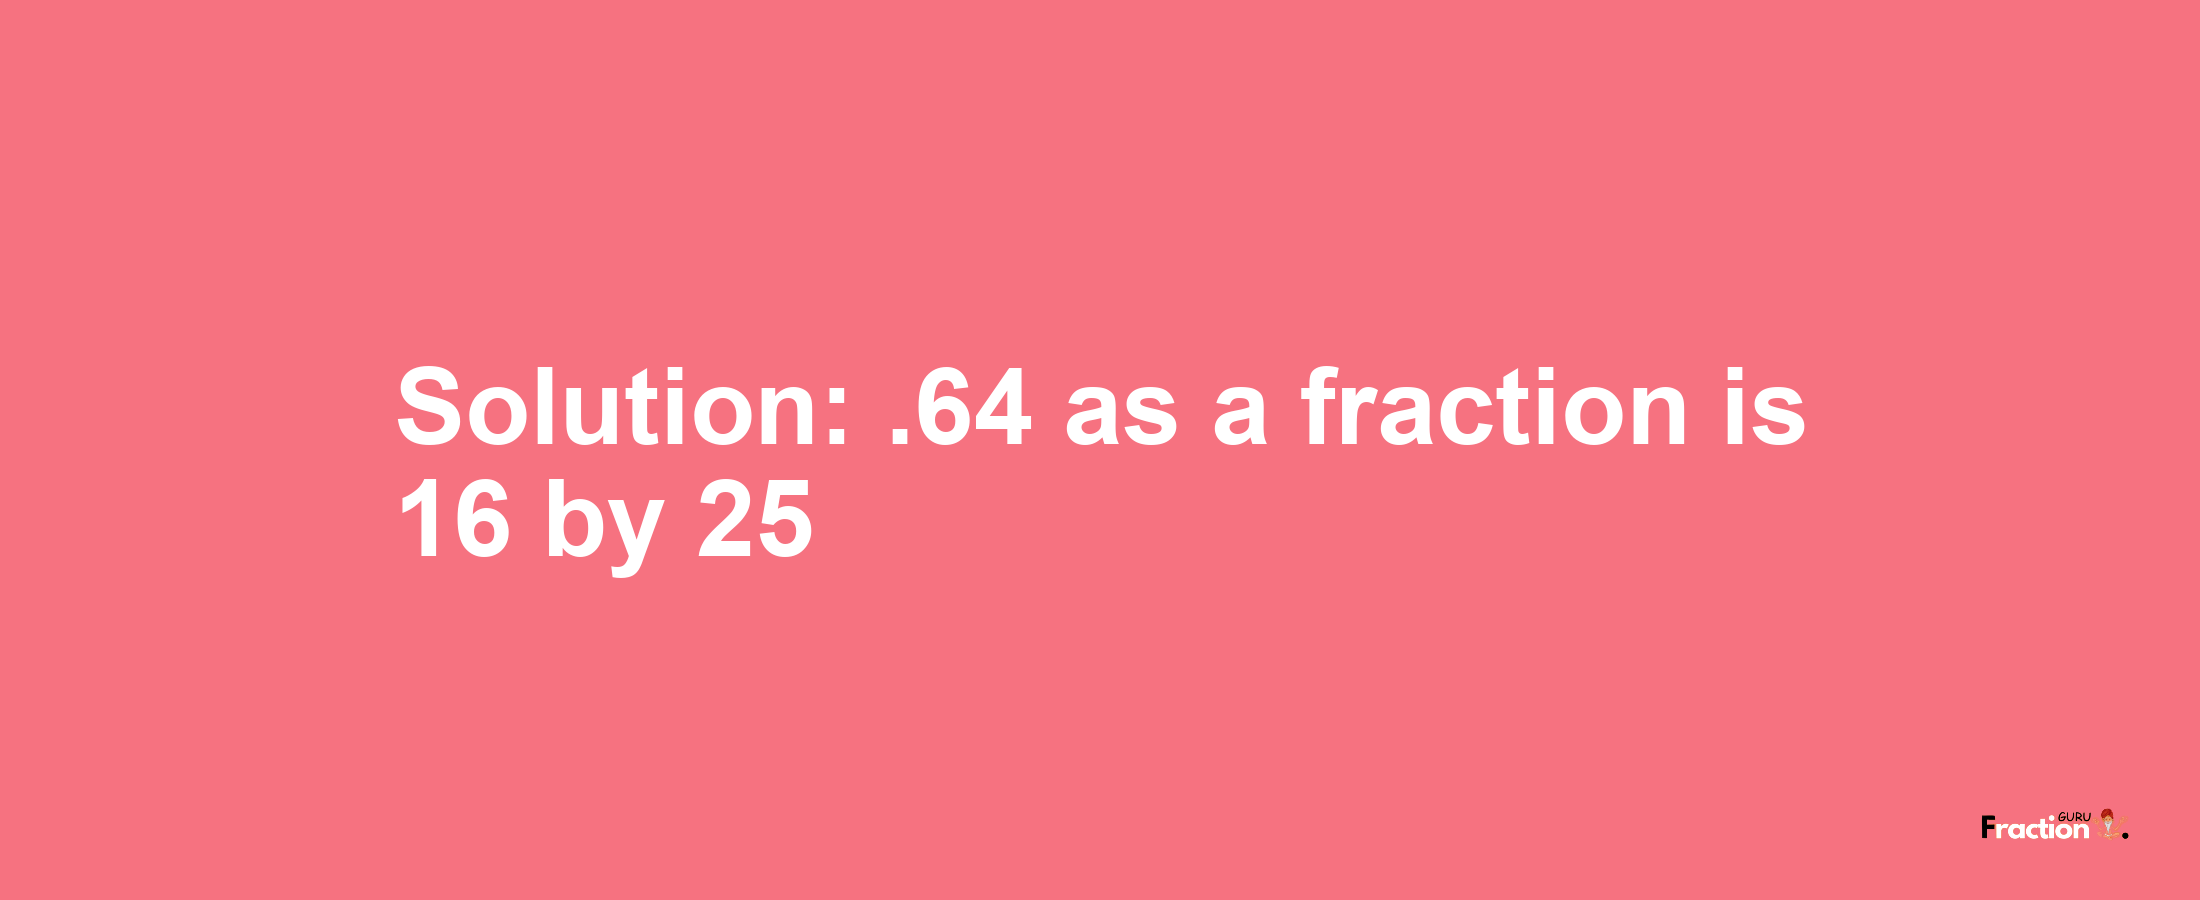 Solution:.64 as a fraction is 16/25